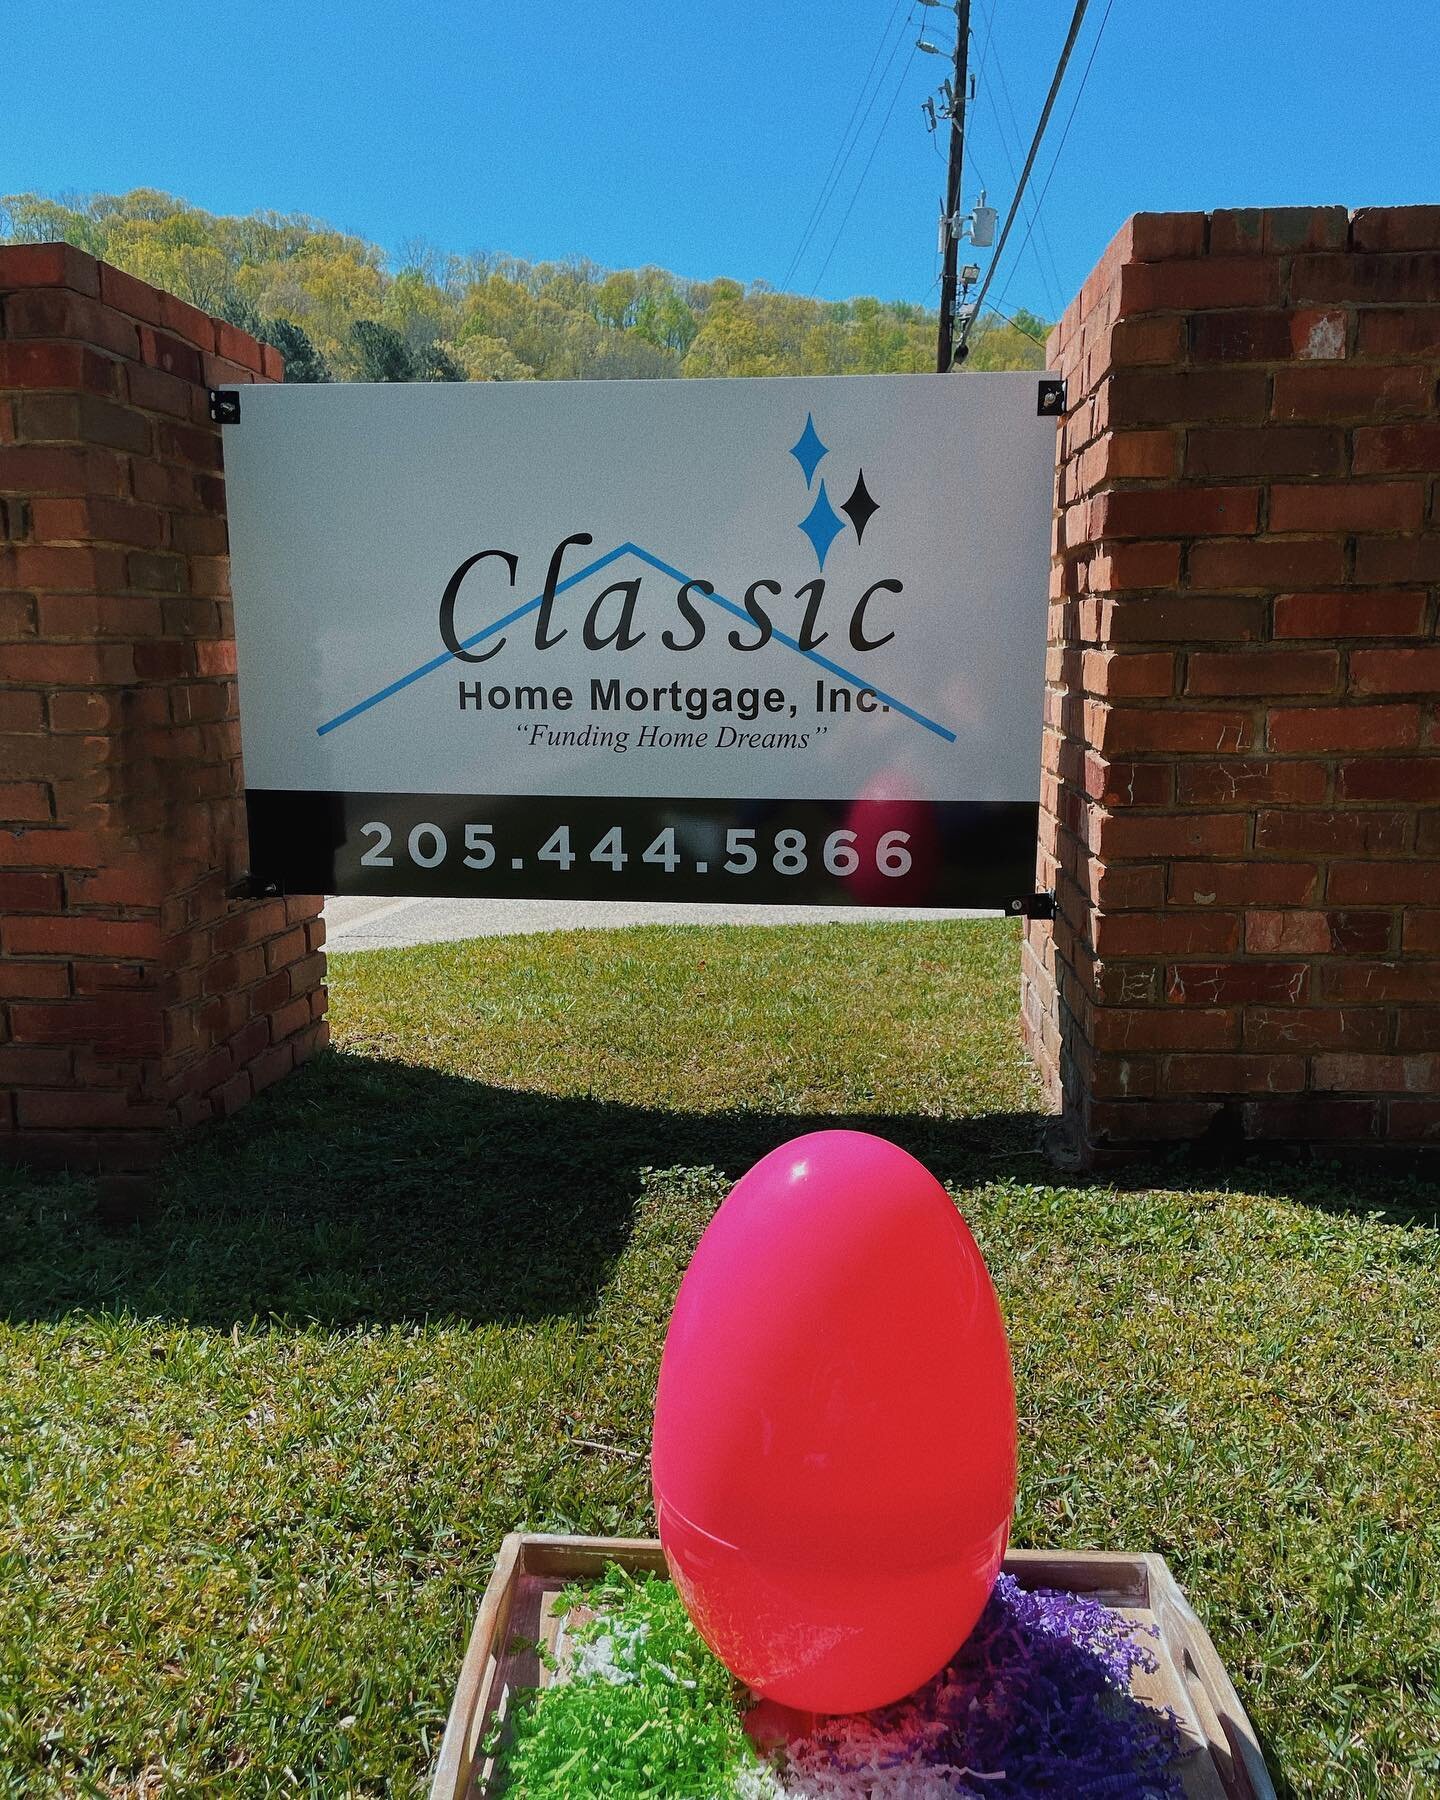 We found this GIANT egg during our Easter Egg Hunt!!! Now it&rsquo;s your turn to like the post, share the post, and guess a number between 1-500 that&rsquo;s inside the egg. The first person who picks, or closest to, the number will win a $100 Visa 